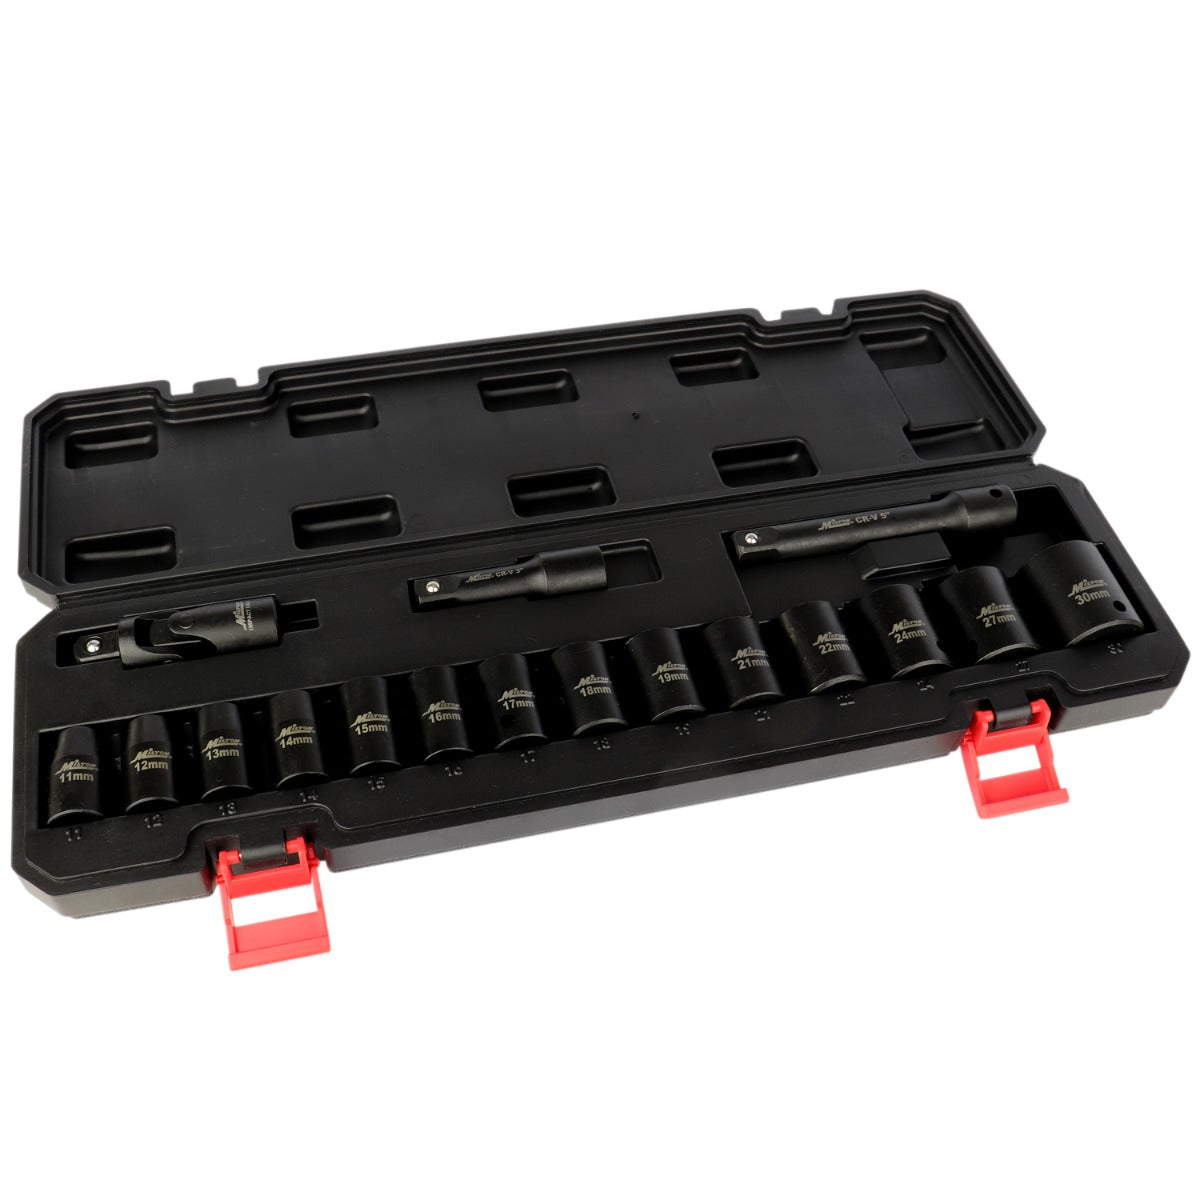 1300-SS-06 1/2 Drive Shallow 11-30 Metric Impact Socket Set w/Universal Joint & Extension Bars (17-Piece)